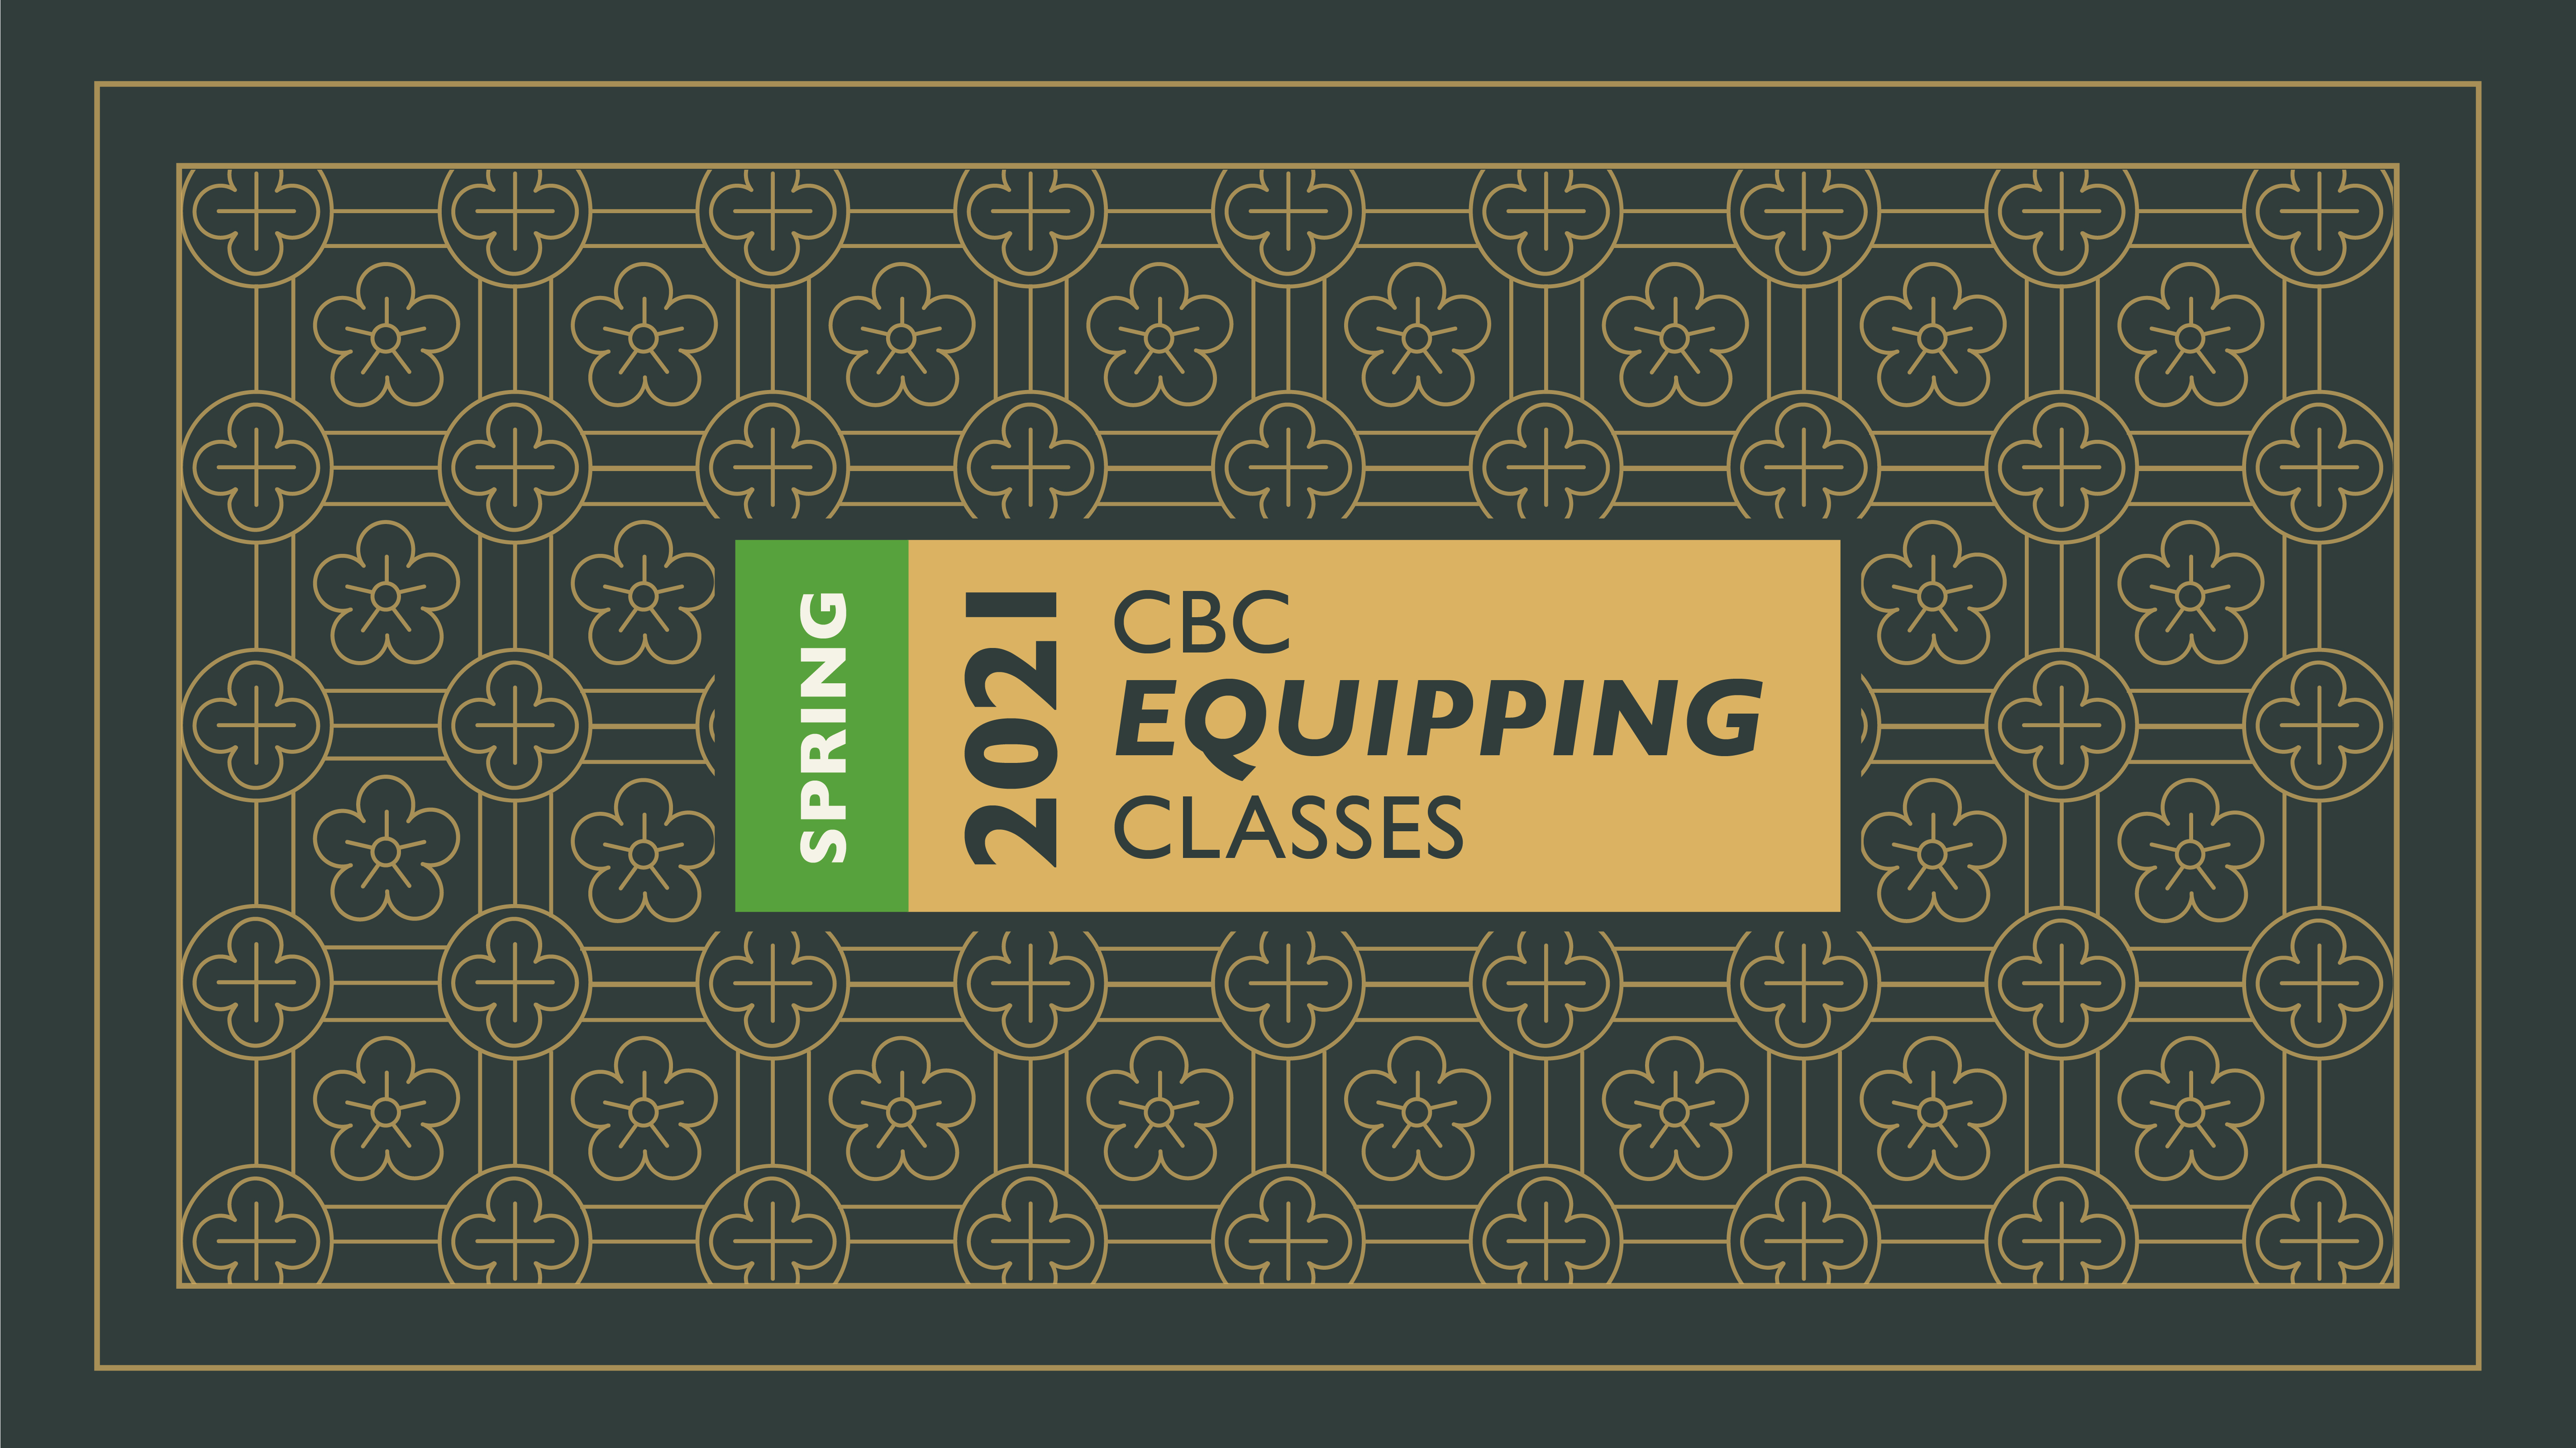 EquippingClassesGeneral2021_A-01 image